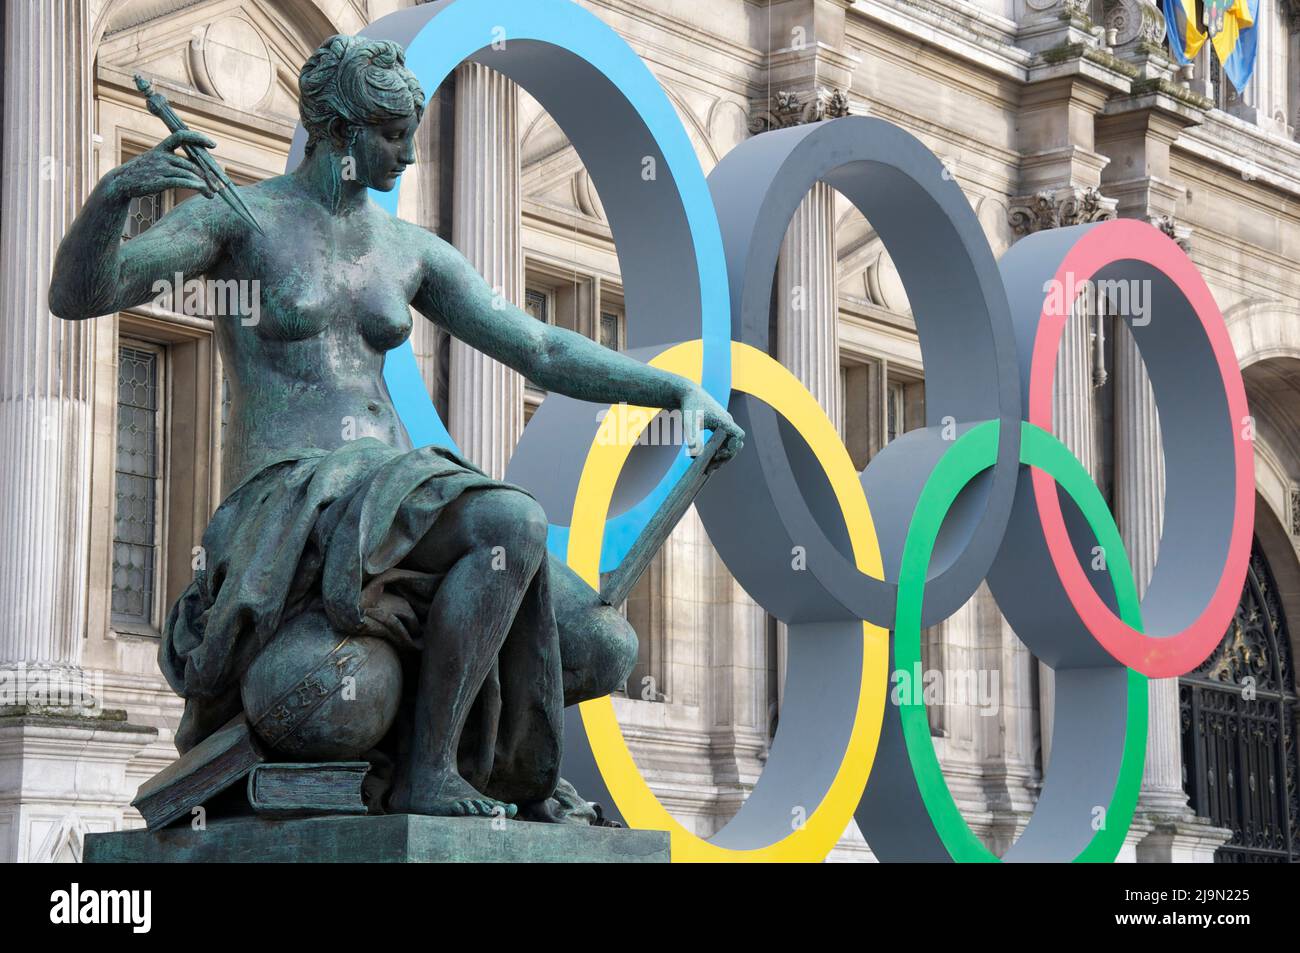 Statue of a nude female figure, “La Science”, sculpted by Jules Blanchard, located outside l’Hotel de Ville in Paris. With Olympic rings as a backdrop. Stock Photo